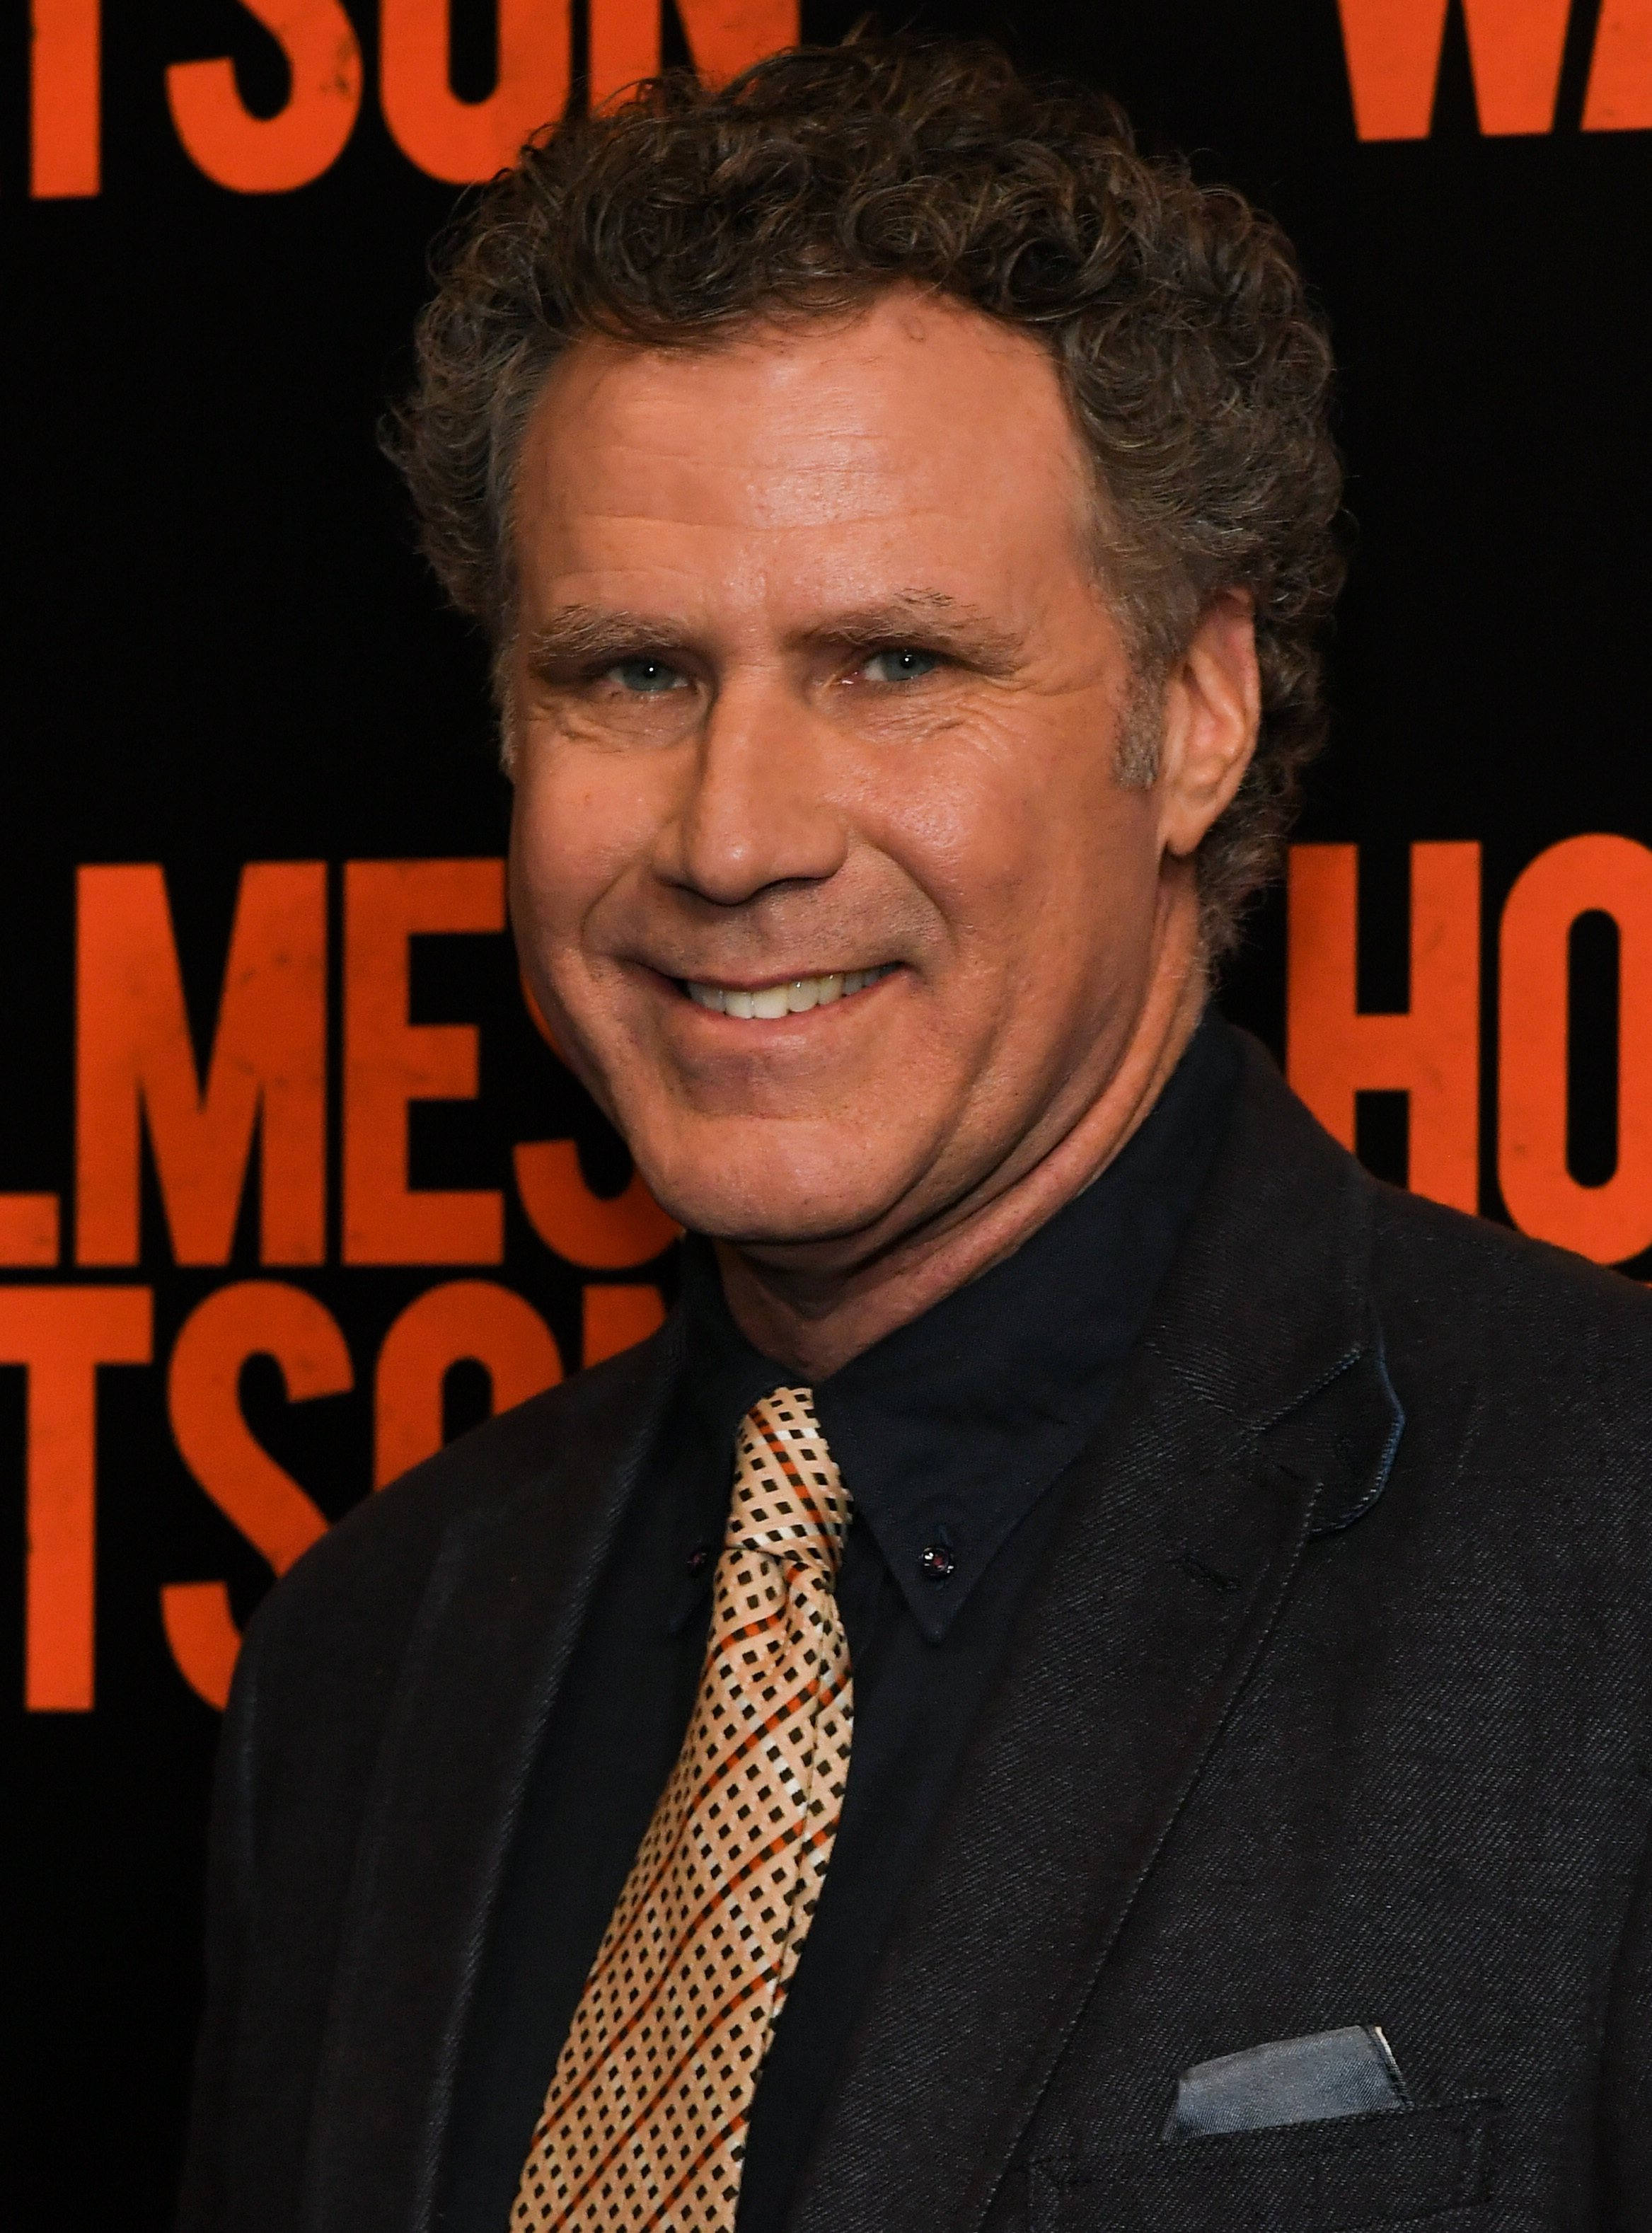 <p>Will Ferrell's uncredited appearance <a href="https://www.wonderwall.com/entertainment/where-are-they-now/wedding-crashers-cast-how-their-lives-have-changed-363828.gallery">in 2005's "Wedding Crashers"</a> happened during one of the movie's best and most pivotal scenes. Will played Chazz Reinhold, the man who passed along the rules of wedding-crashing to his protégé, Jeremy (played by Vince Vaughn), in 1993. When John (played by Owen Wilson) actually meets Chazz, he's revealed to be a lazy man-child who still lives with his mother. "Wedding Crashers" was a huge success that was loved by audiences and critics alike, grossing over $285 million on a $40 million budget.</p>